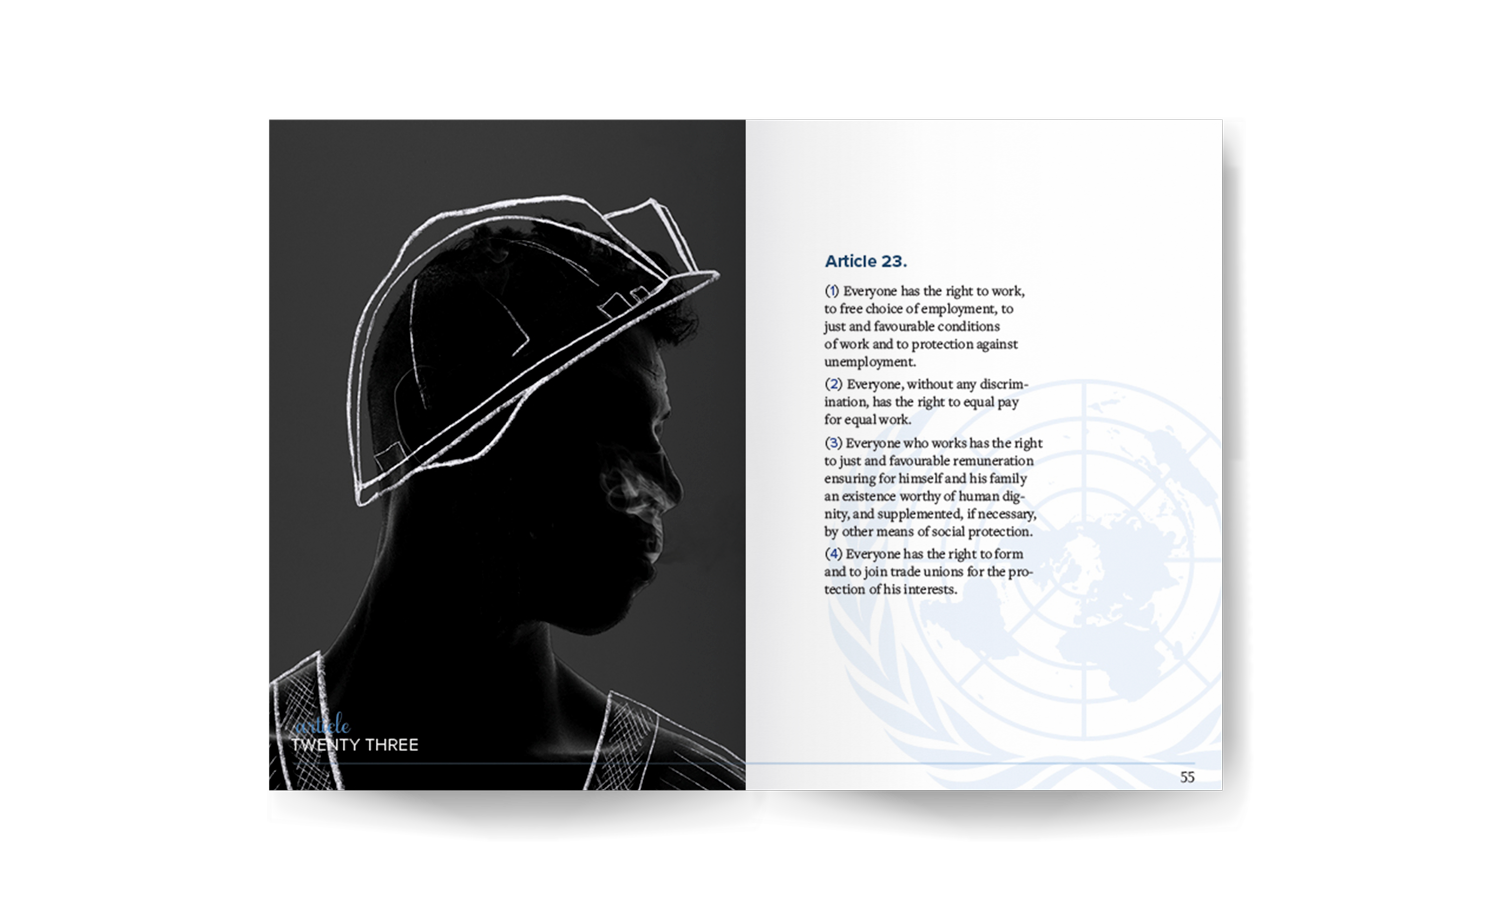 A book spread showing a man with a drawn on safety helmet and the text of the 23rd article of the UDHR.